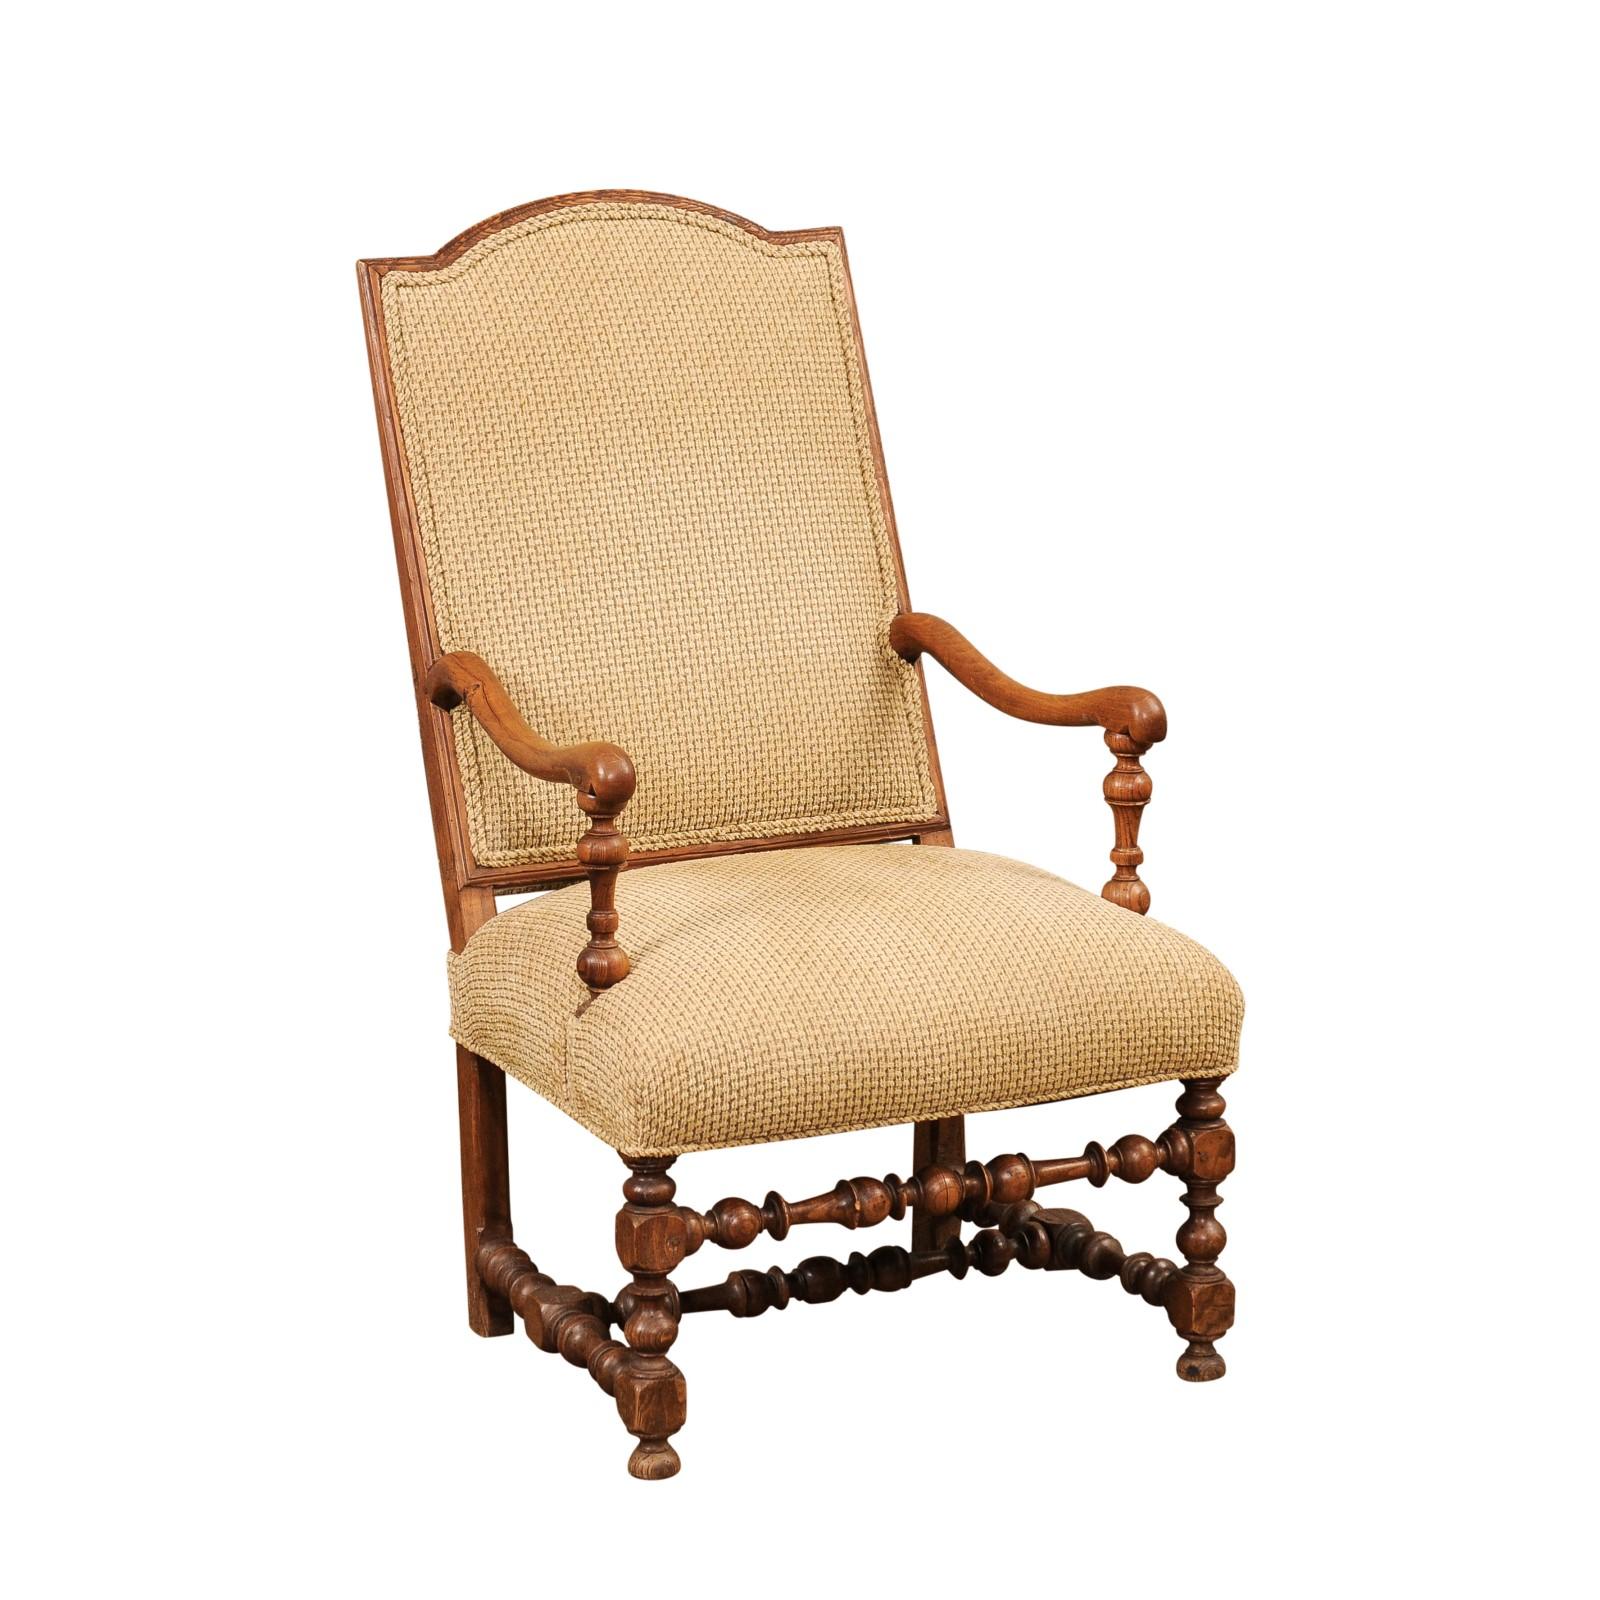 A Louis XIII style French walnut armchair from the 19th century with arched top back, turned base and large scrolling arms. This 19th-century French walnut armchair, crafted in the enduring Louis XIII style, is a testament to timeless elegance and